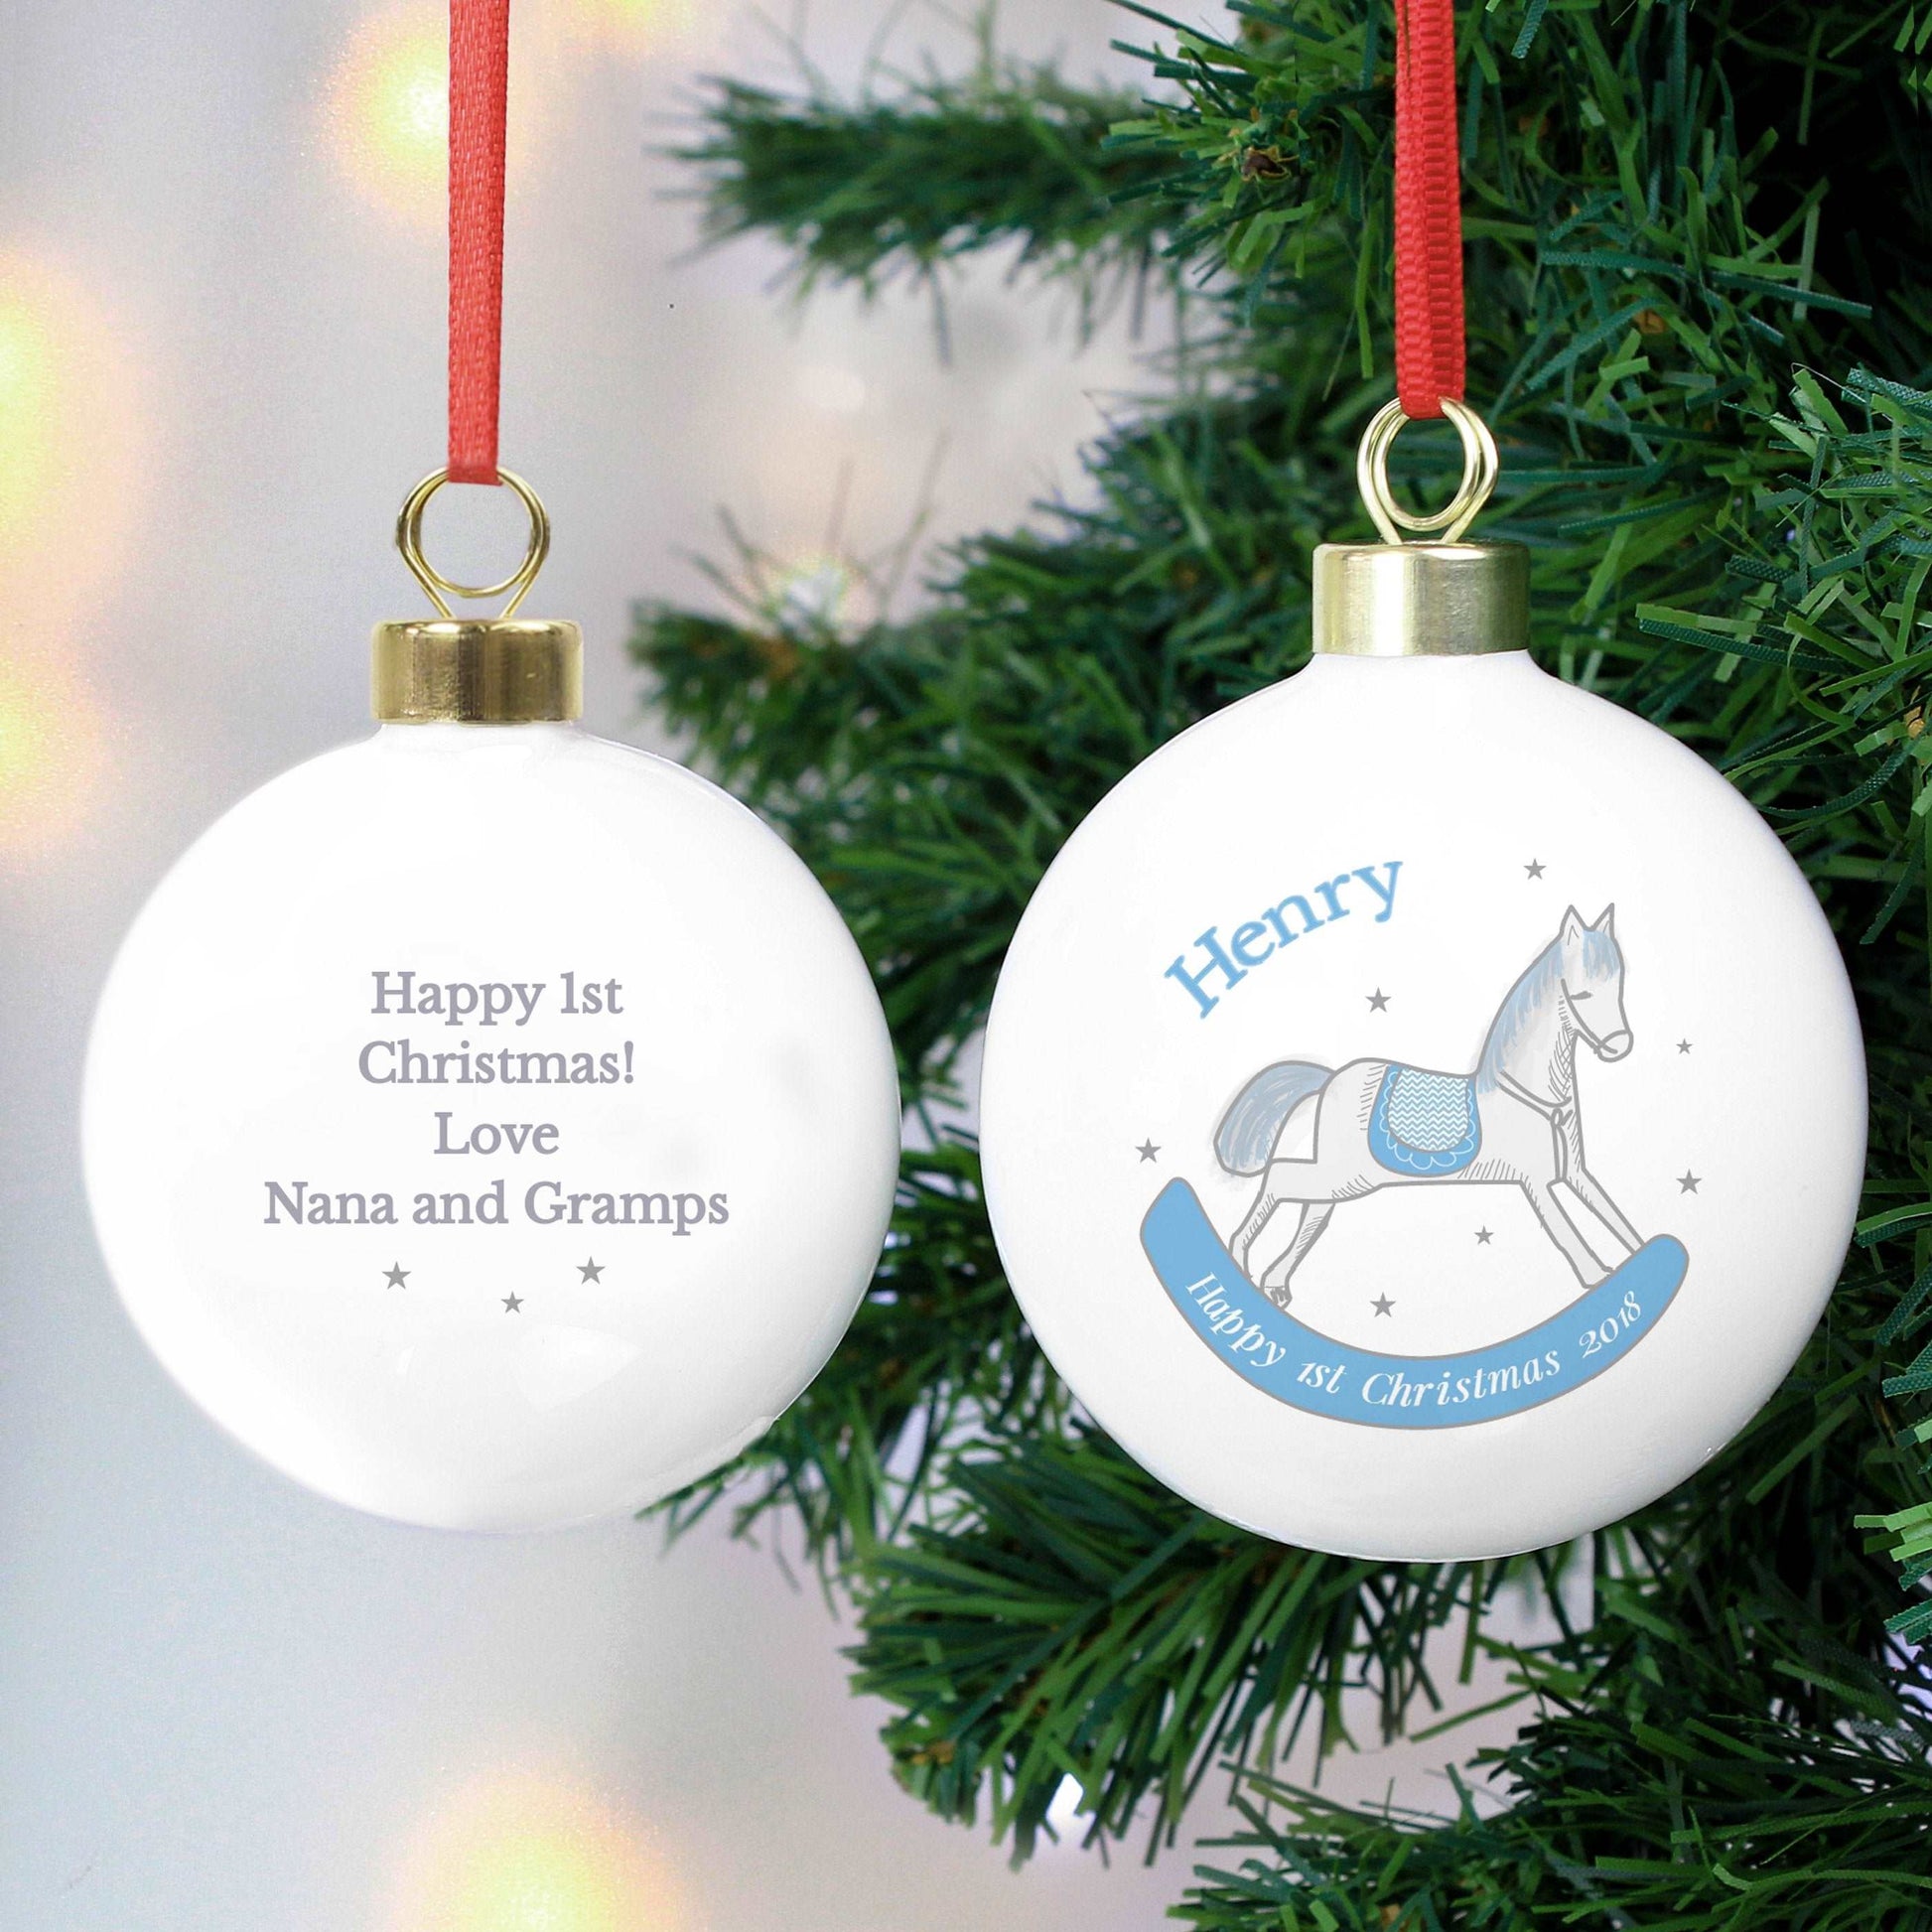 Ceramic 1st Christmas bauble with Blue rocking horse design that can be personalised with a name and message By Sweetlea Gifts